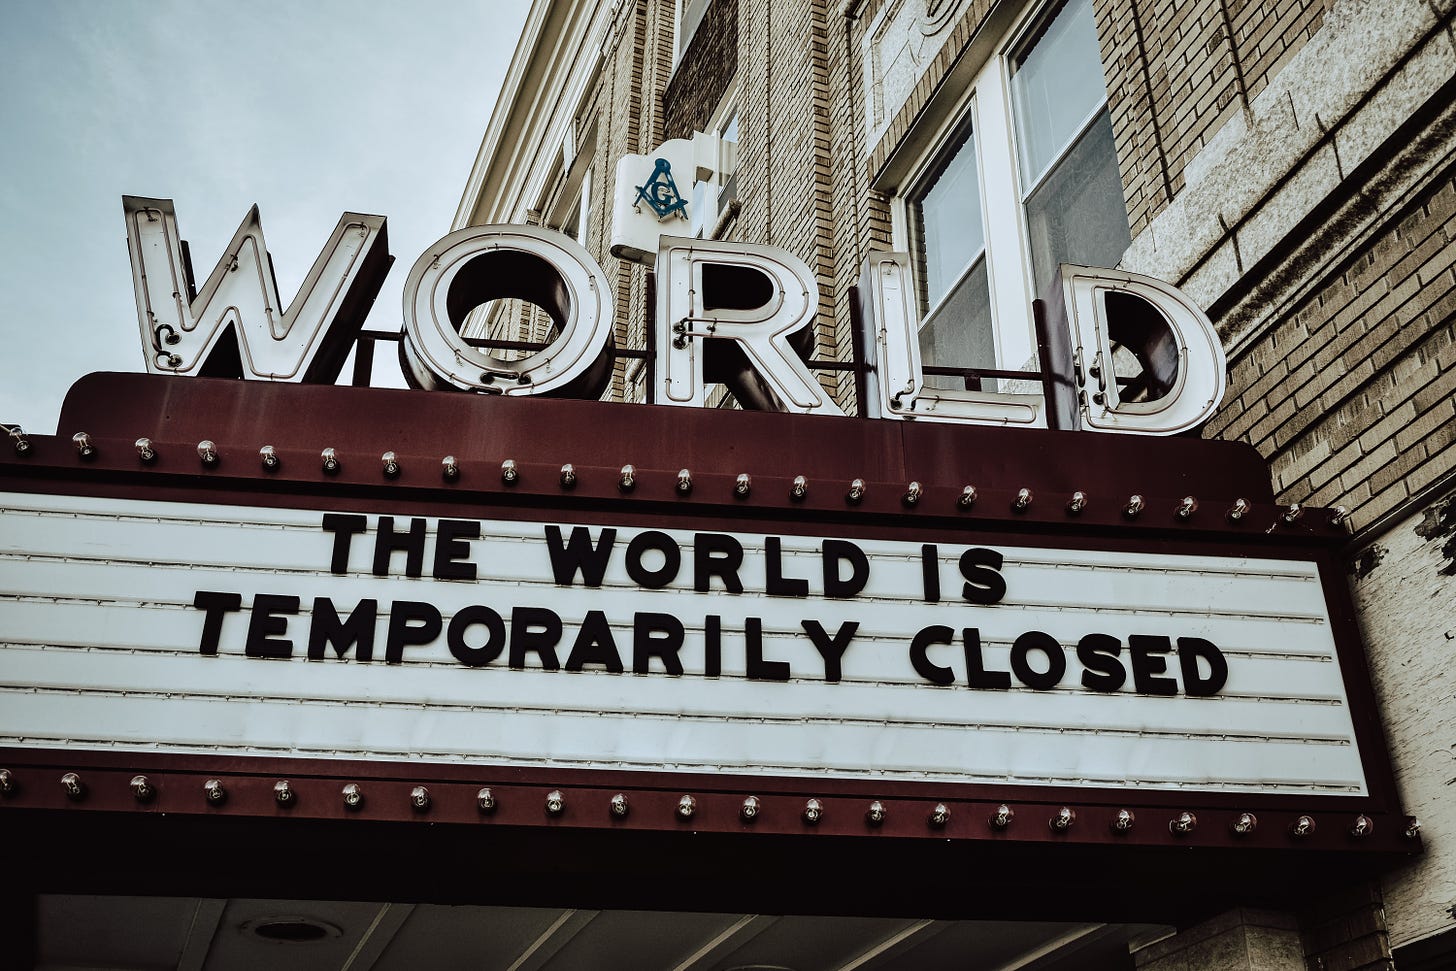 A theater marquee for the World with text: The world is temporarily closed.